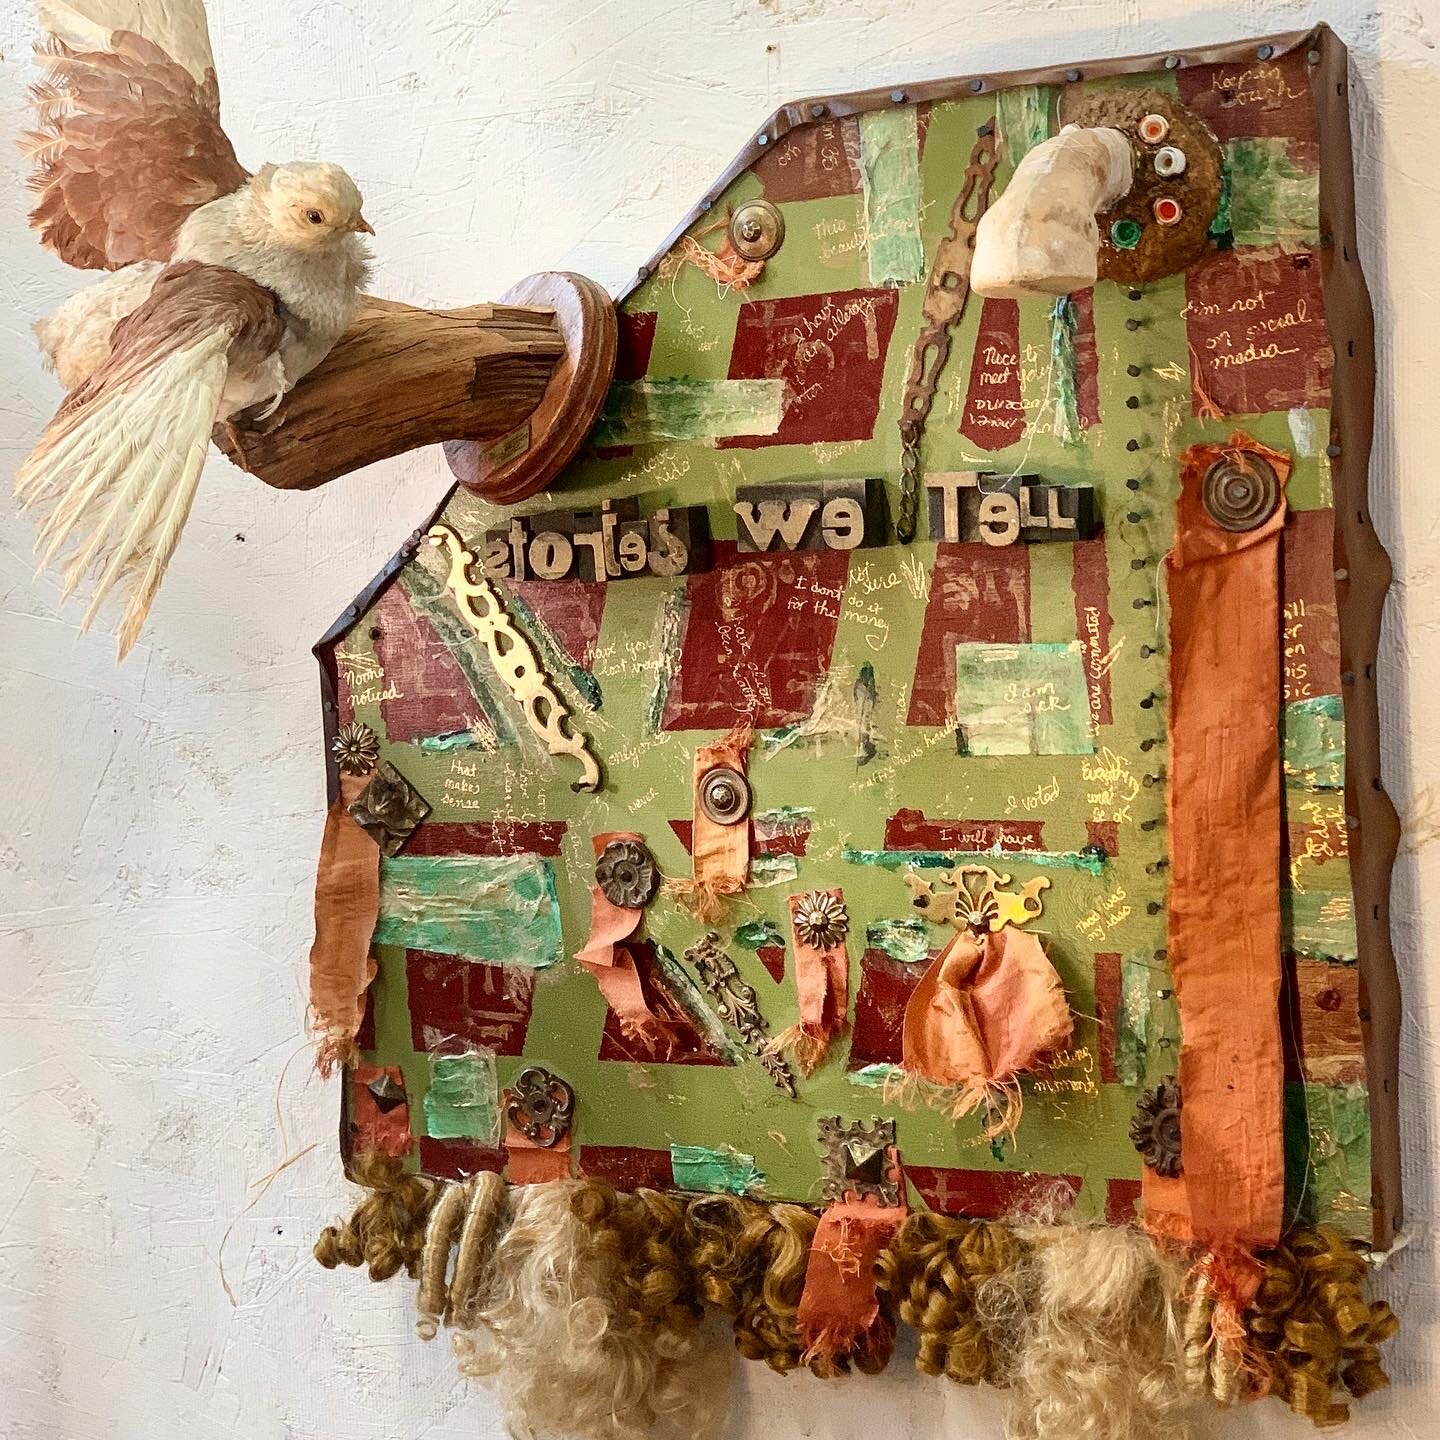    Stories We Tell     found objects, wood, paint, gold leaf;  23 x 24 x 12 inches 